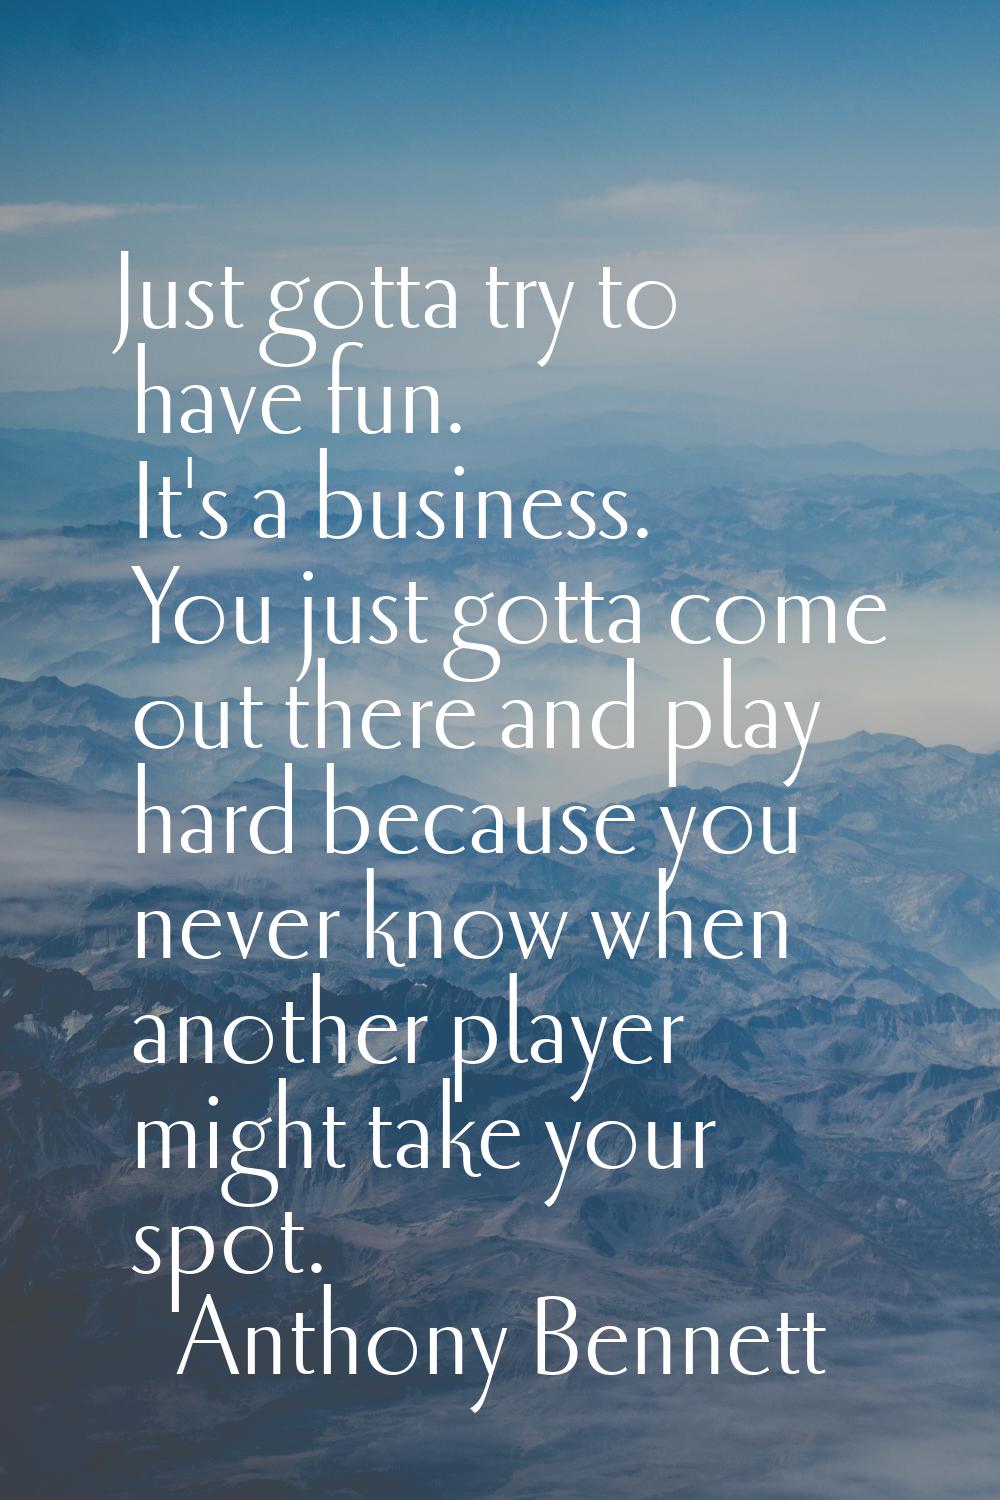 Just gotta try to have fun. It's a business. You just gotta come out there and play hard because yo